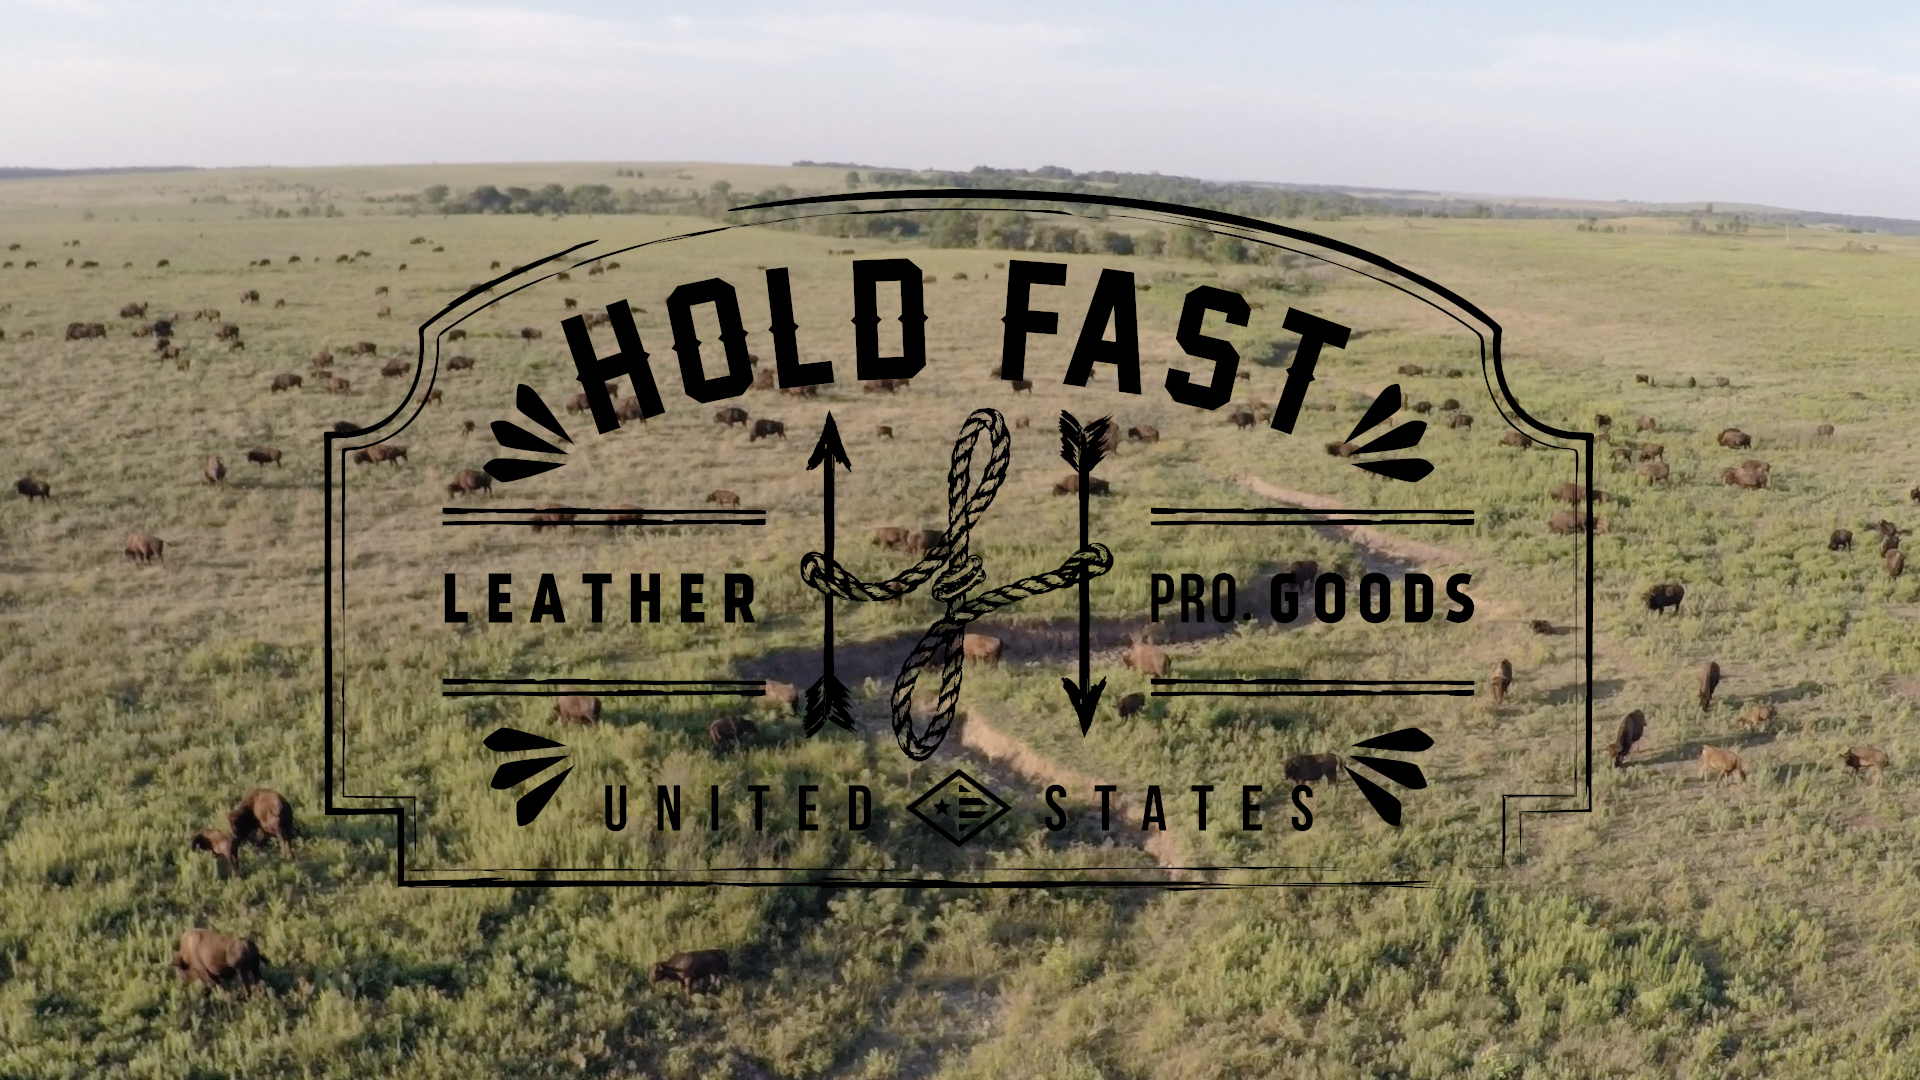 holdfast gear made in america video thumbnail